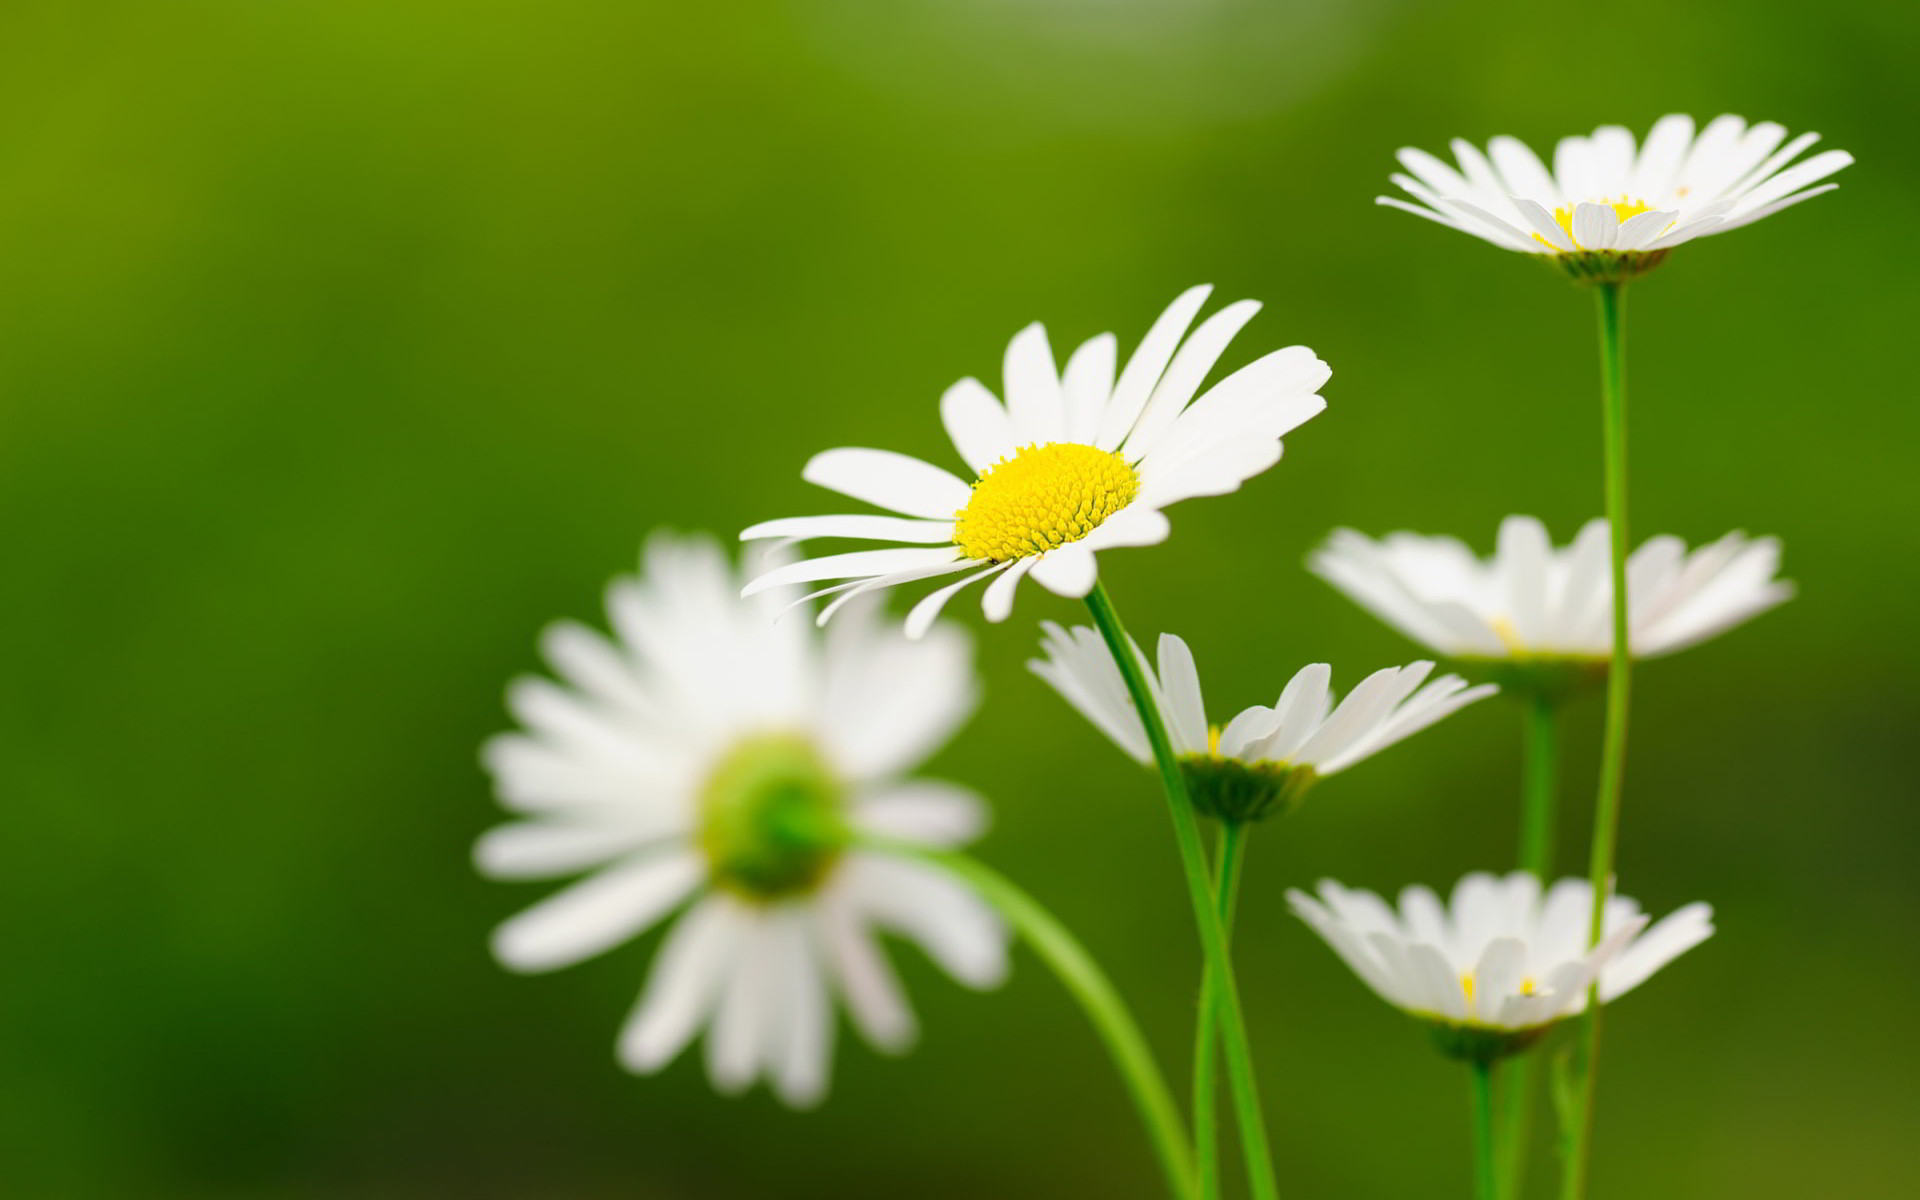 1920x1200 Awesome, Daisies, White, Widescreen, High, Resolution, Wallpaper, For,  Desktop, Background, Colorful, High Quality, Best, 1920Ã1200 Wallpaper HD